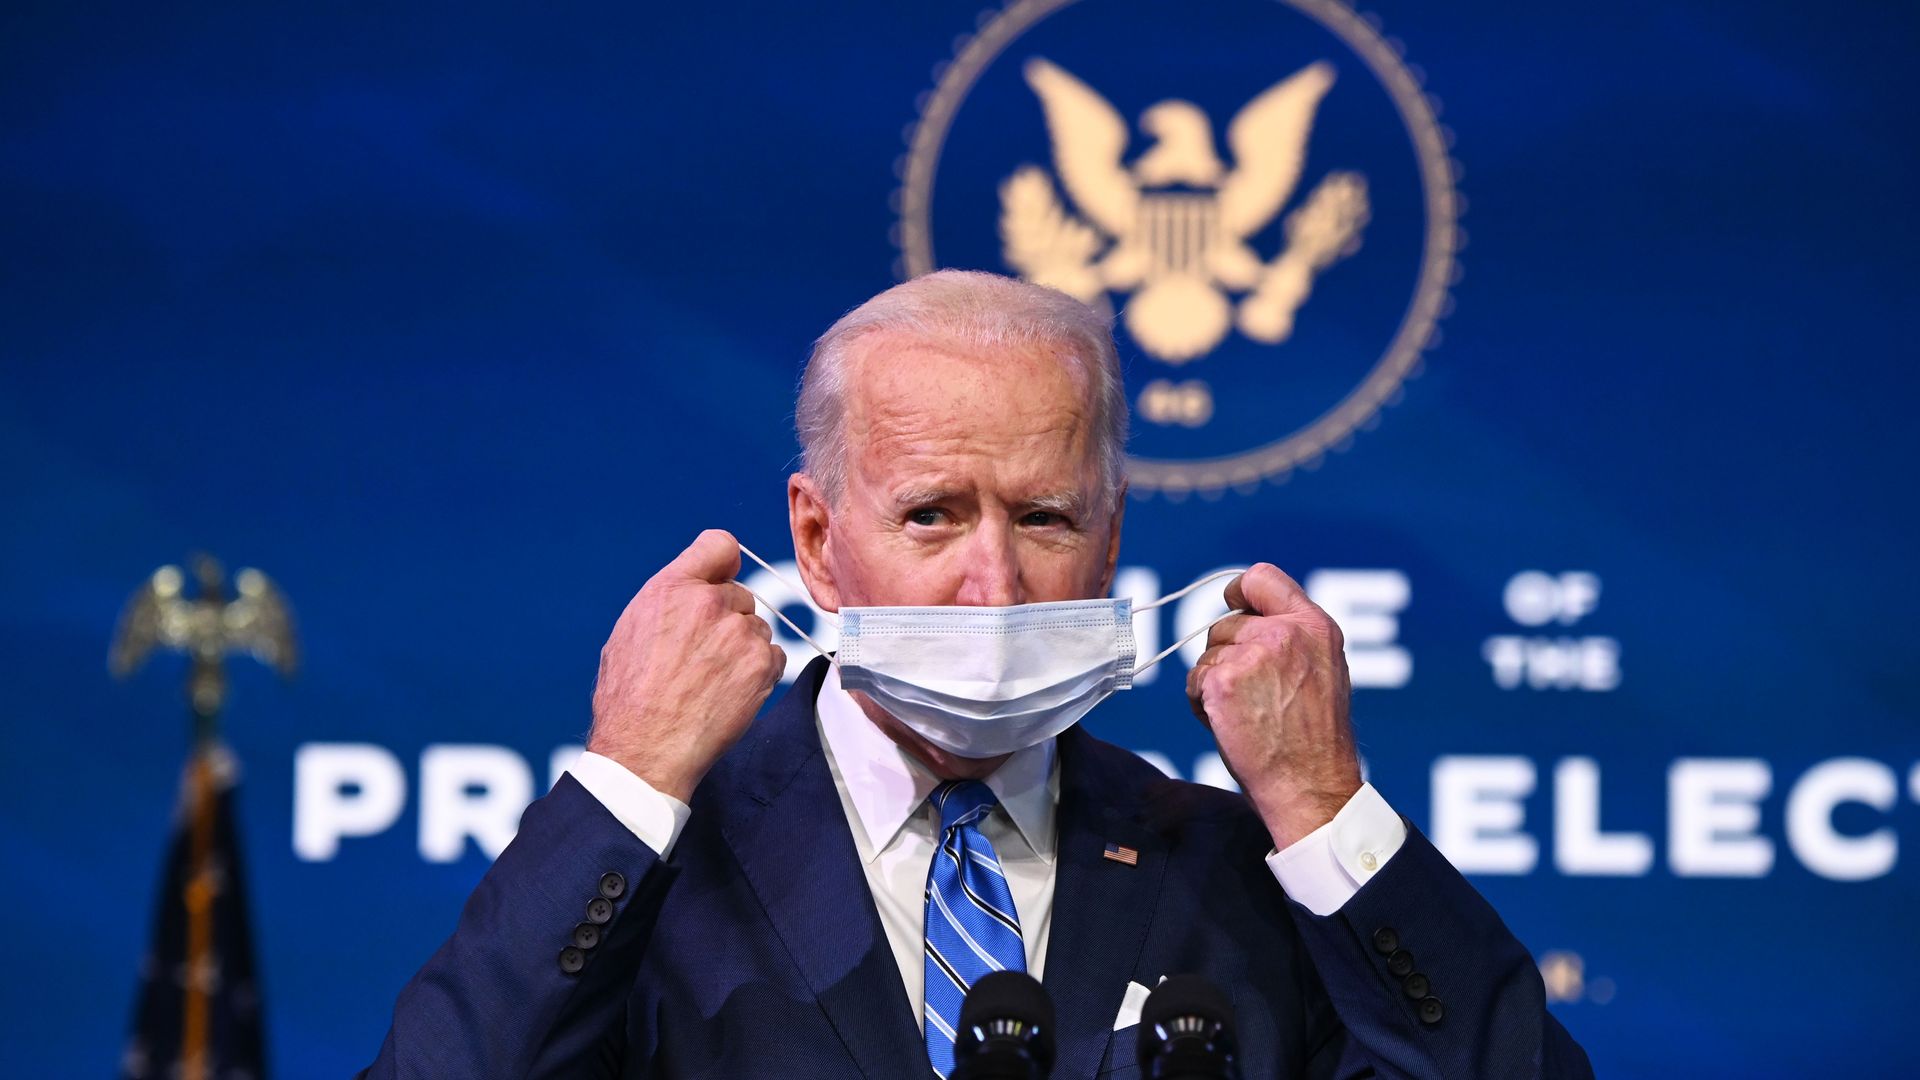 Joe Biden is seen removing a mask before outlining his program to provide COVID-19 relief.